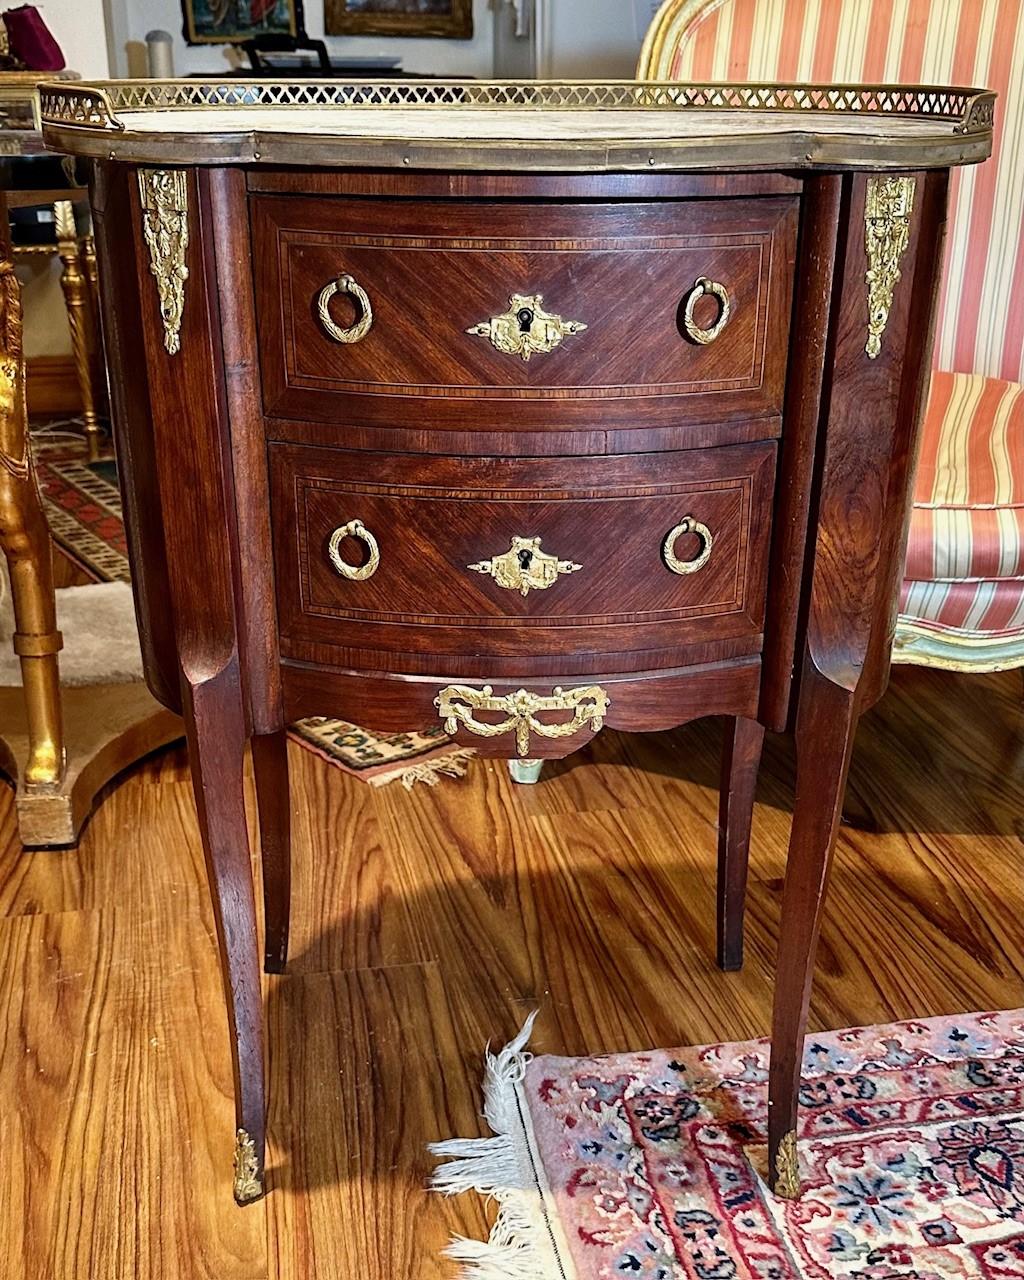 Late 19th Century Louis XVI Style Fruitwood Marquetry 2-Drawer Commode

This glowing kidney shaped fruitwood Marquetry commode in the Louis XVI style is richly adorned with gilded bronze ornaments. The Fine veneer marquetry work is a feature on all